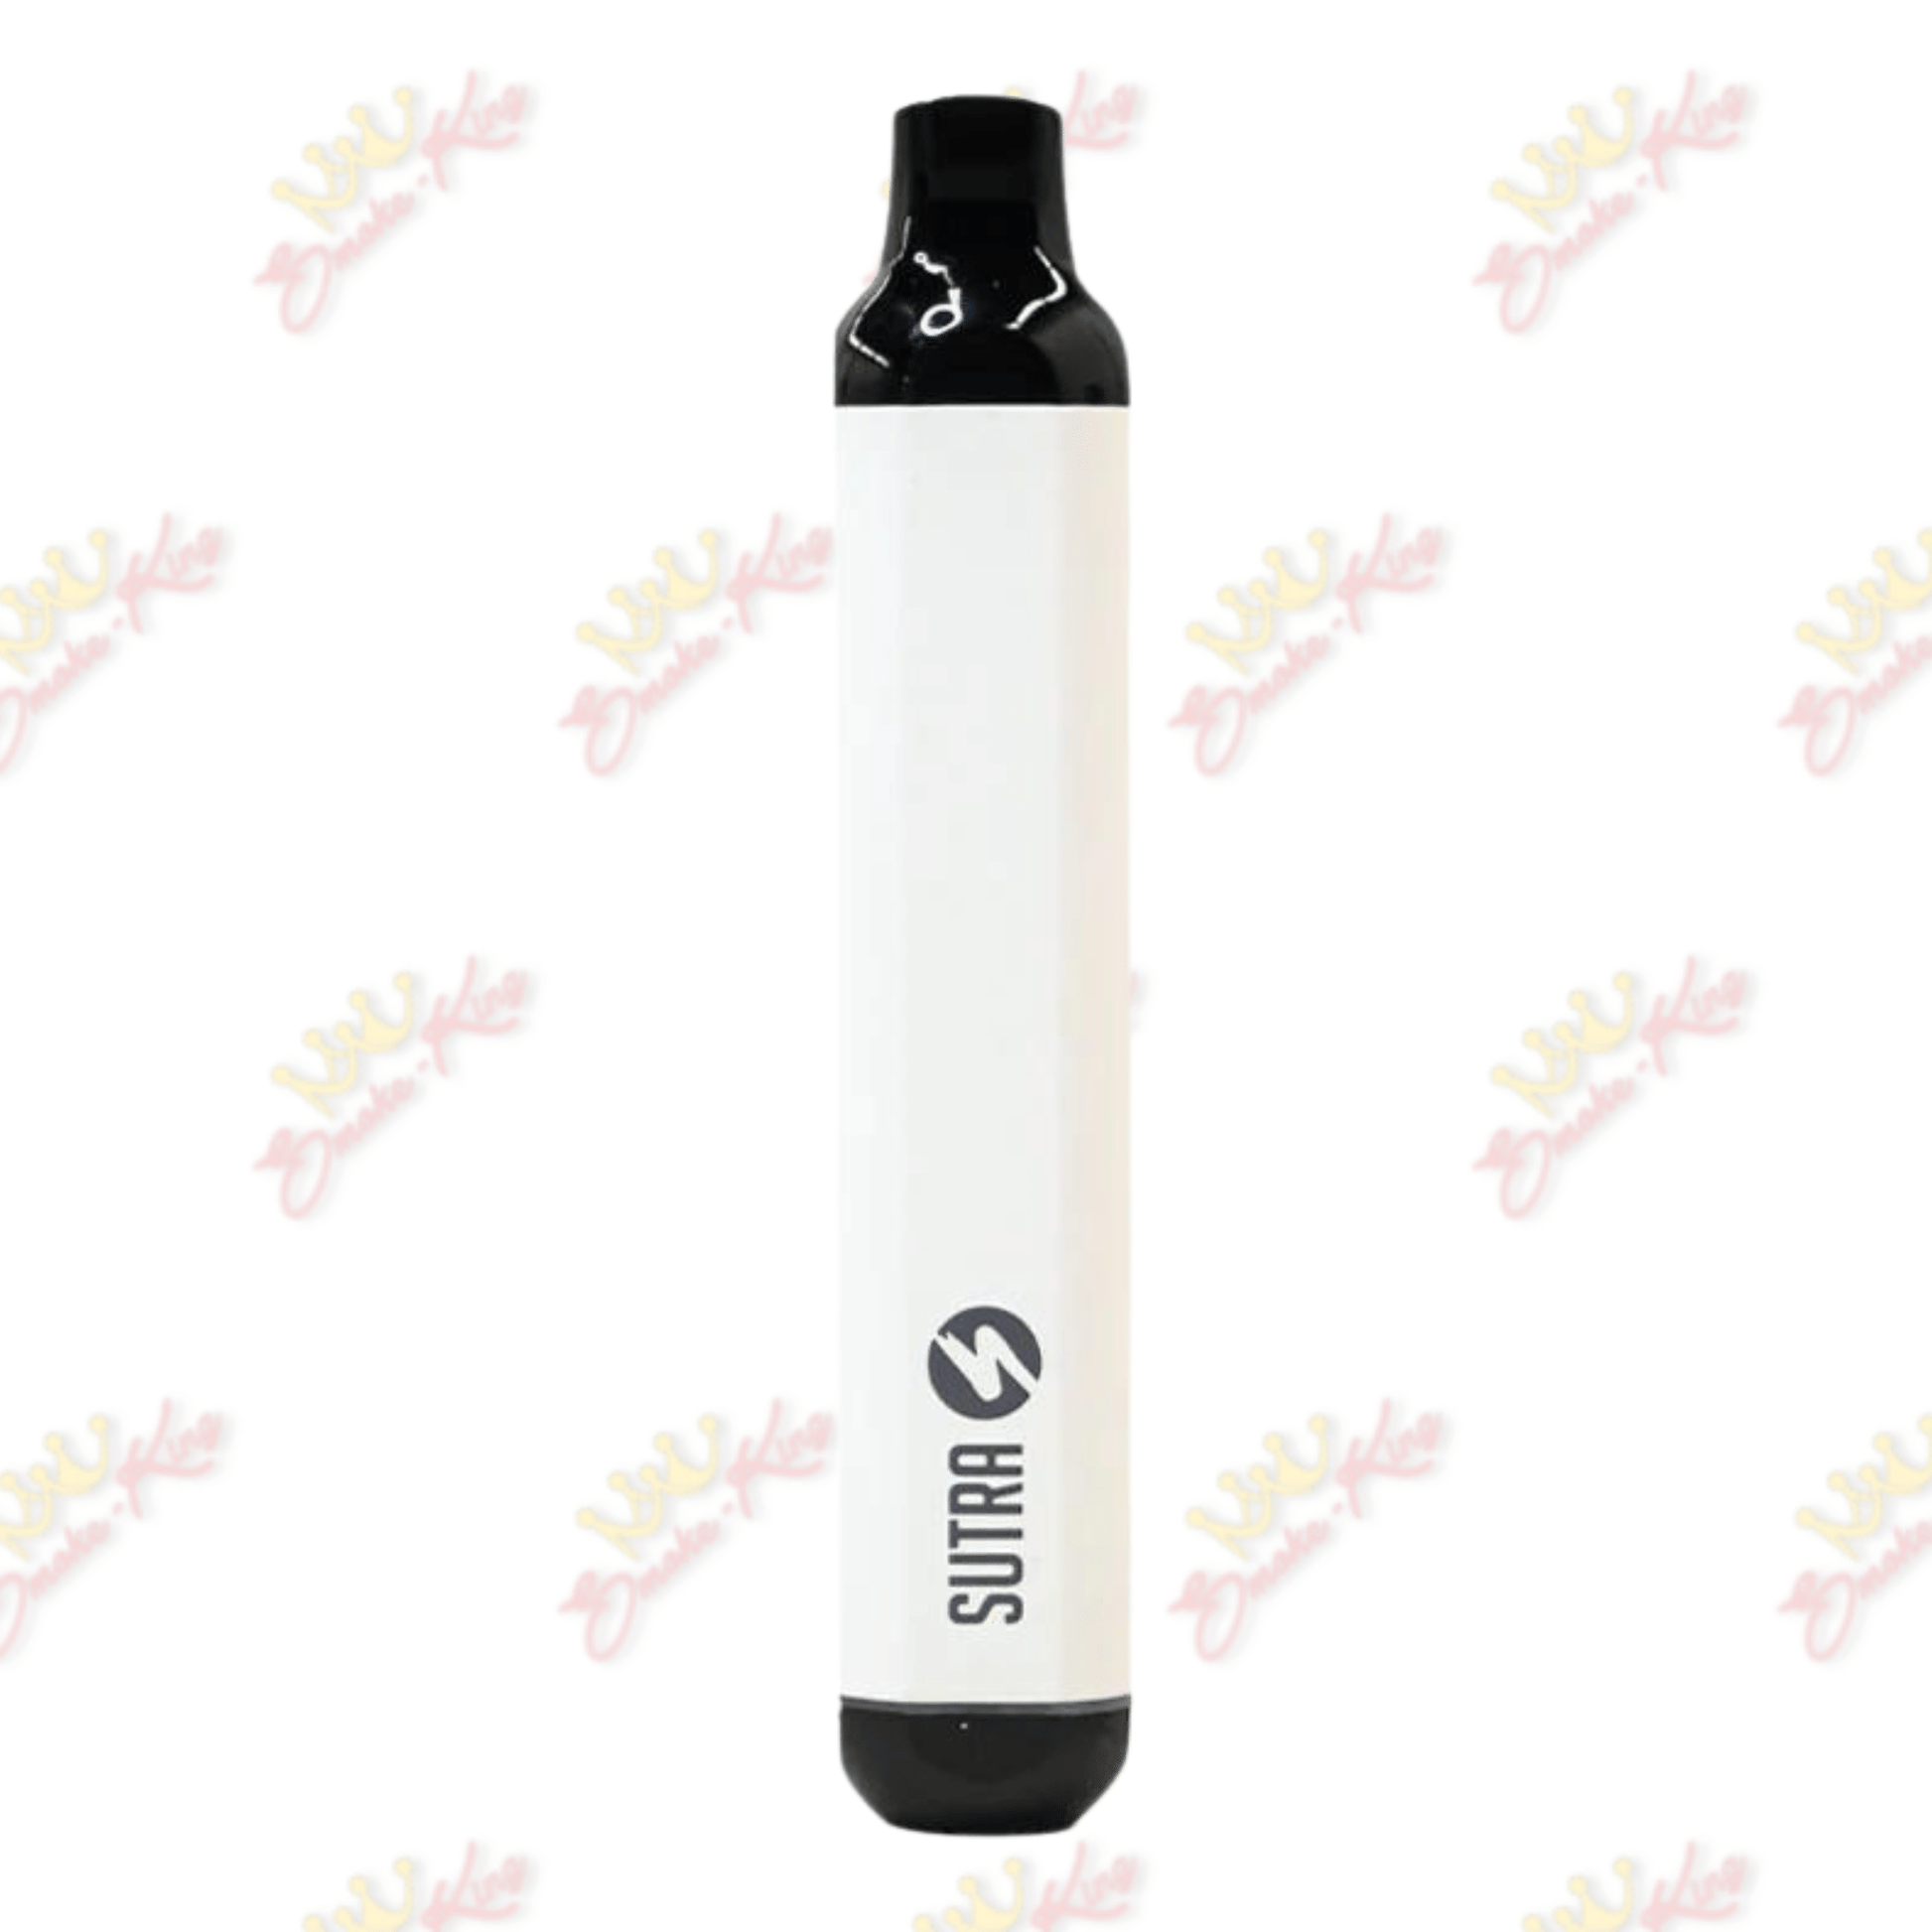 Sutra White Sutra Silo Discreet Battery Sutra Silo Discreet Battery | 510 Cartridge Battery | Smoke King